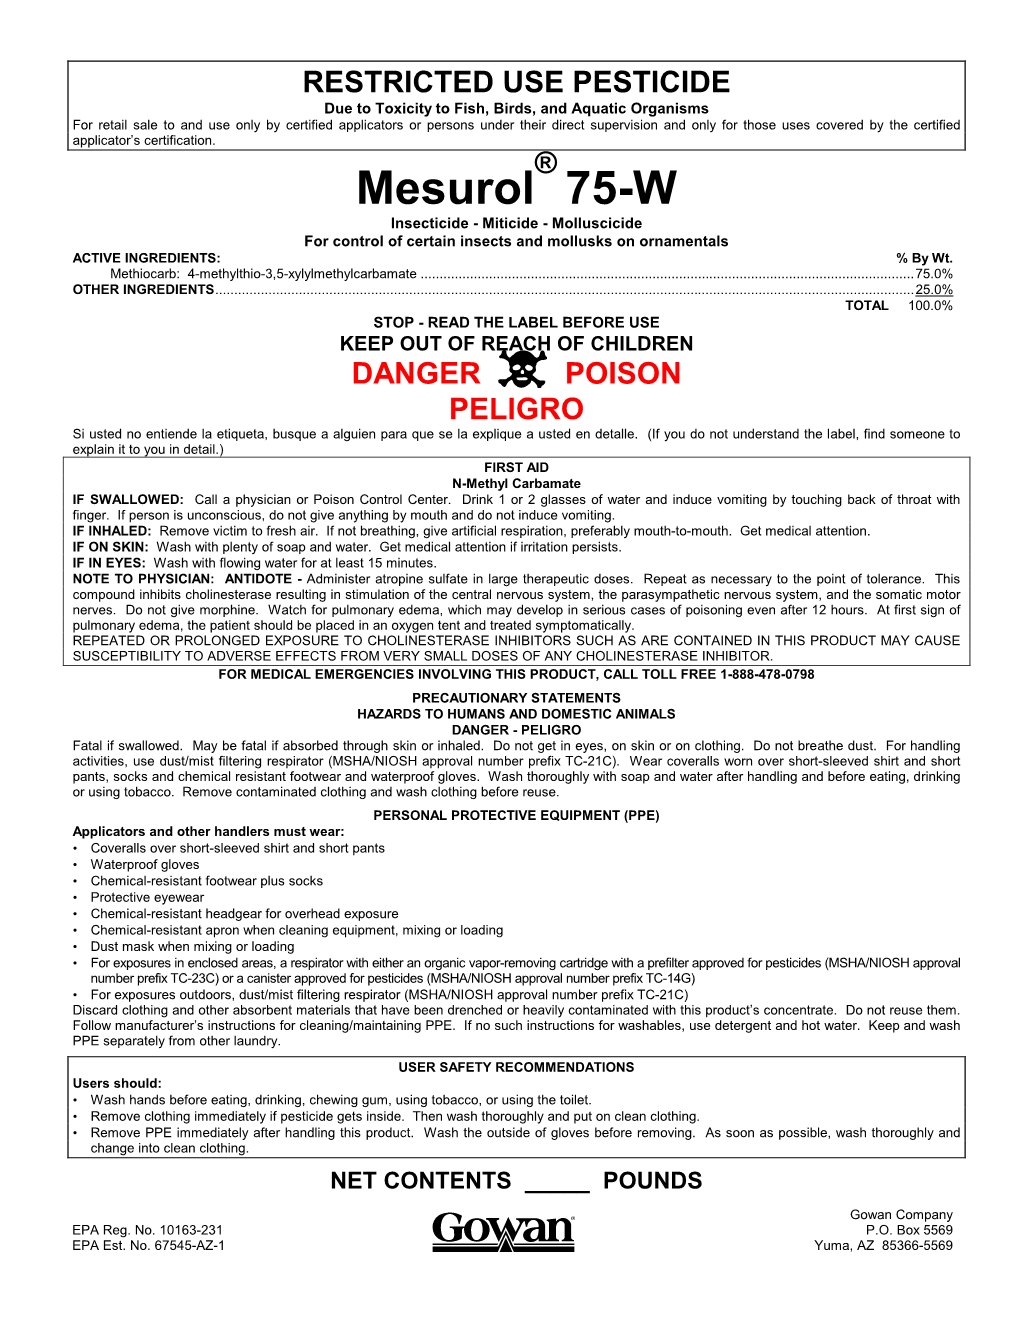 Mesurol 75-W Insecticide - Miticide - Molluscicide for Control of Certain Insects and Mollusks on Ornamentals ACTIVE INGREDIENTS: % by Wt